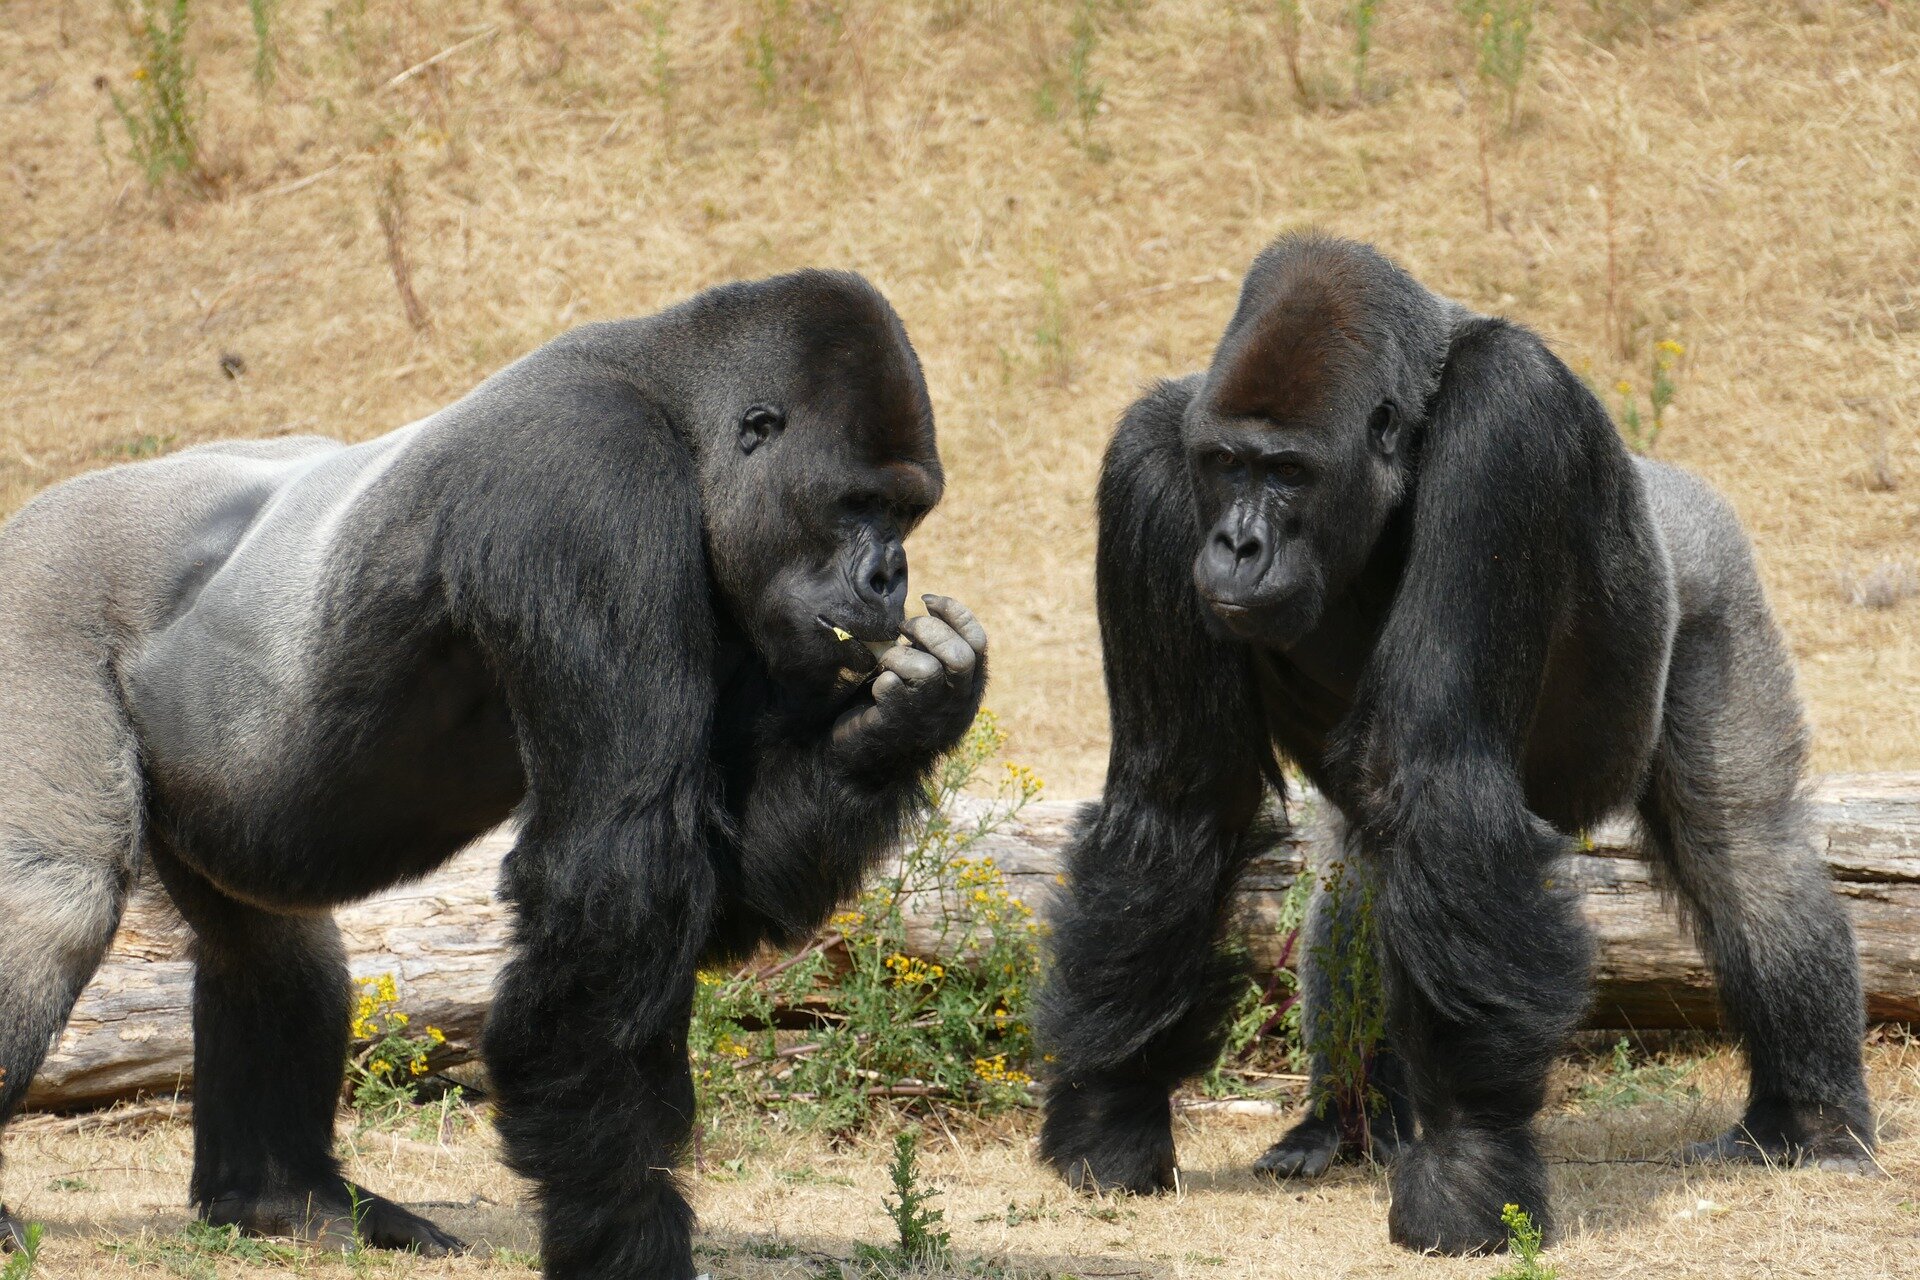 #Dizzy apes provide clues on human need for mind altering experiences